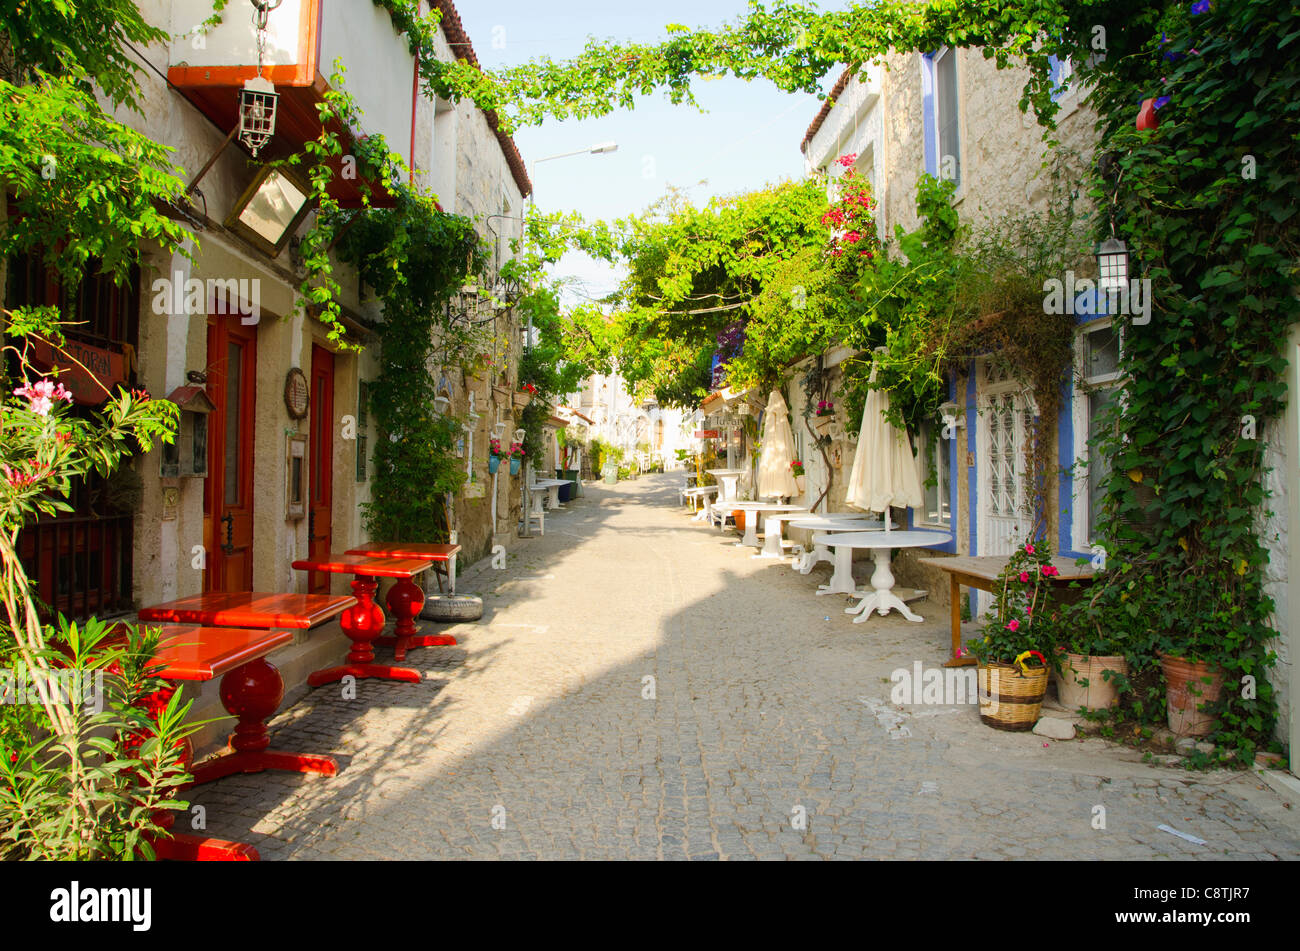 Turkey, Cesme, Alacati, Traditional alley in village Stock Photo